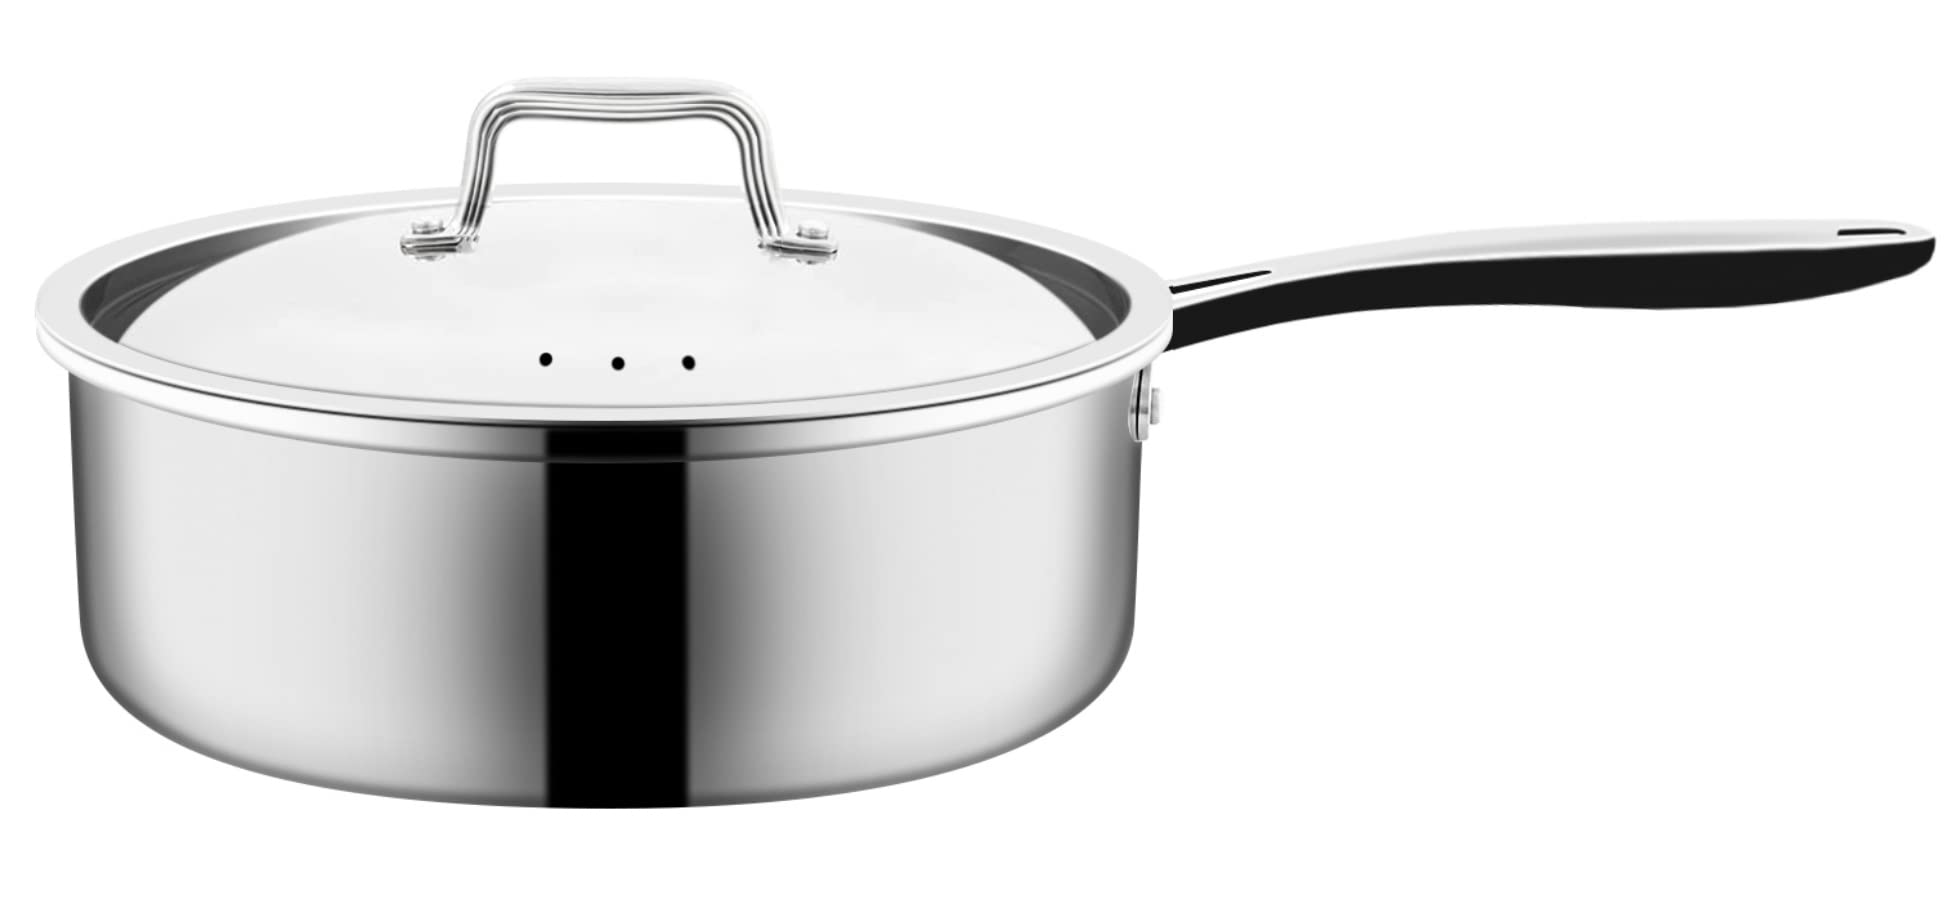 NUWAVE Commercial 1.5-Quart Stainless Steel Saucepan with Vented Lid, Tri-Ply Construction, Premium 18/10 Stainless Steel, NSF Certified